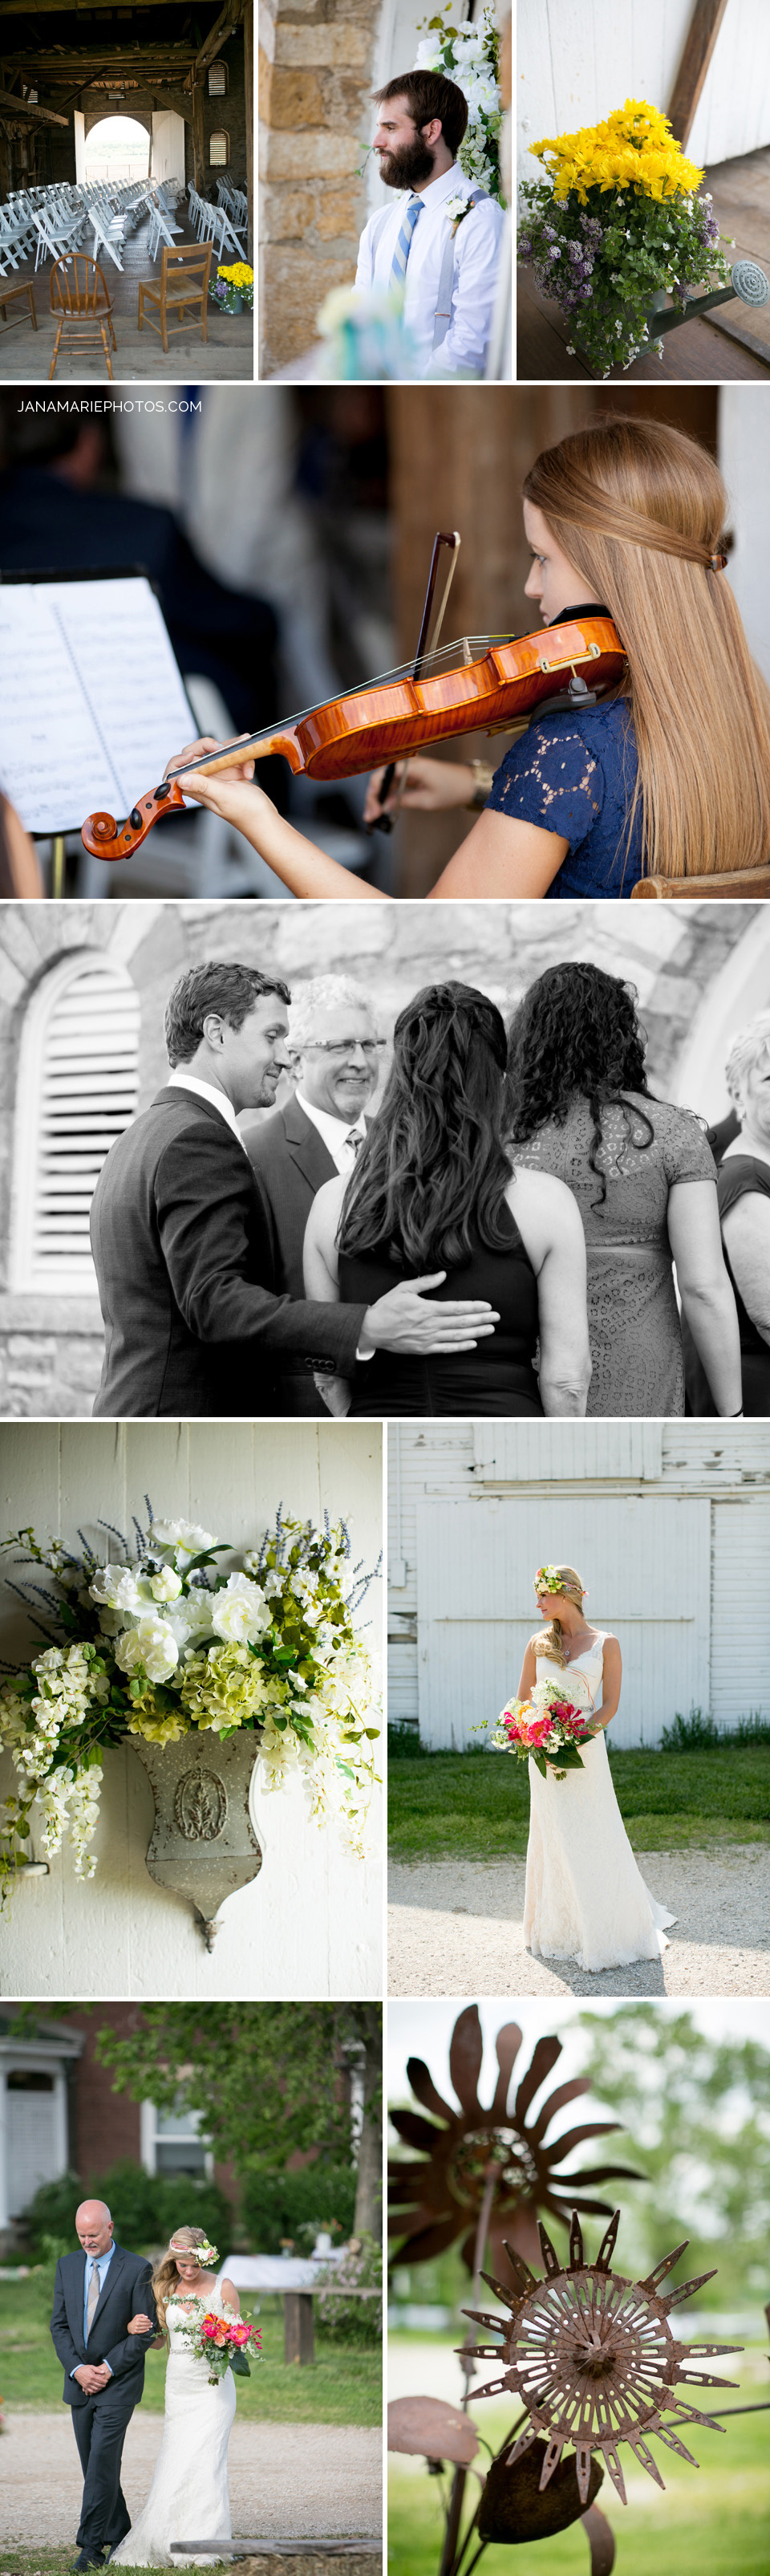 History Taylor Barn, Best Lawrence wedding photographer, KC weddings, Jana Marie Photography, Eclectic details, outdoor ceremony, Spring, Anthropology flowers, DIY decor, Red door wedding event planning